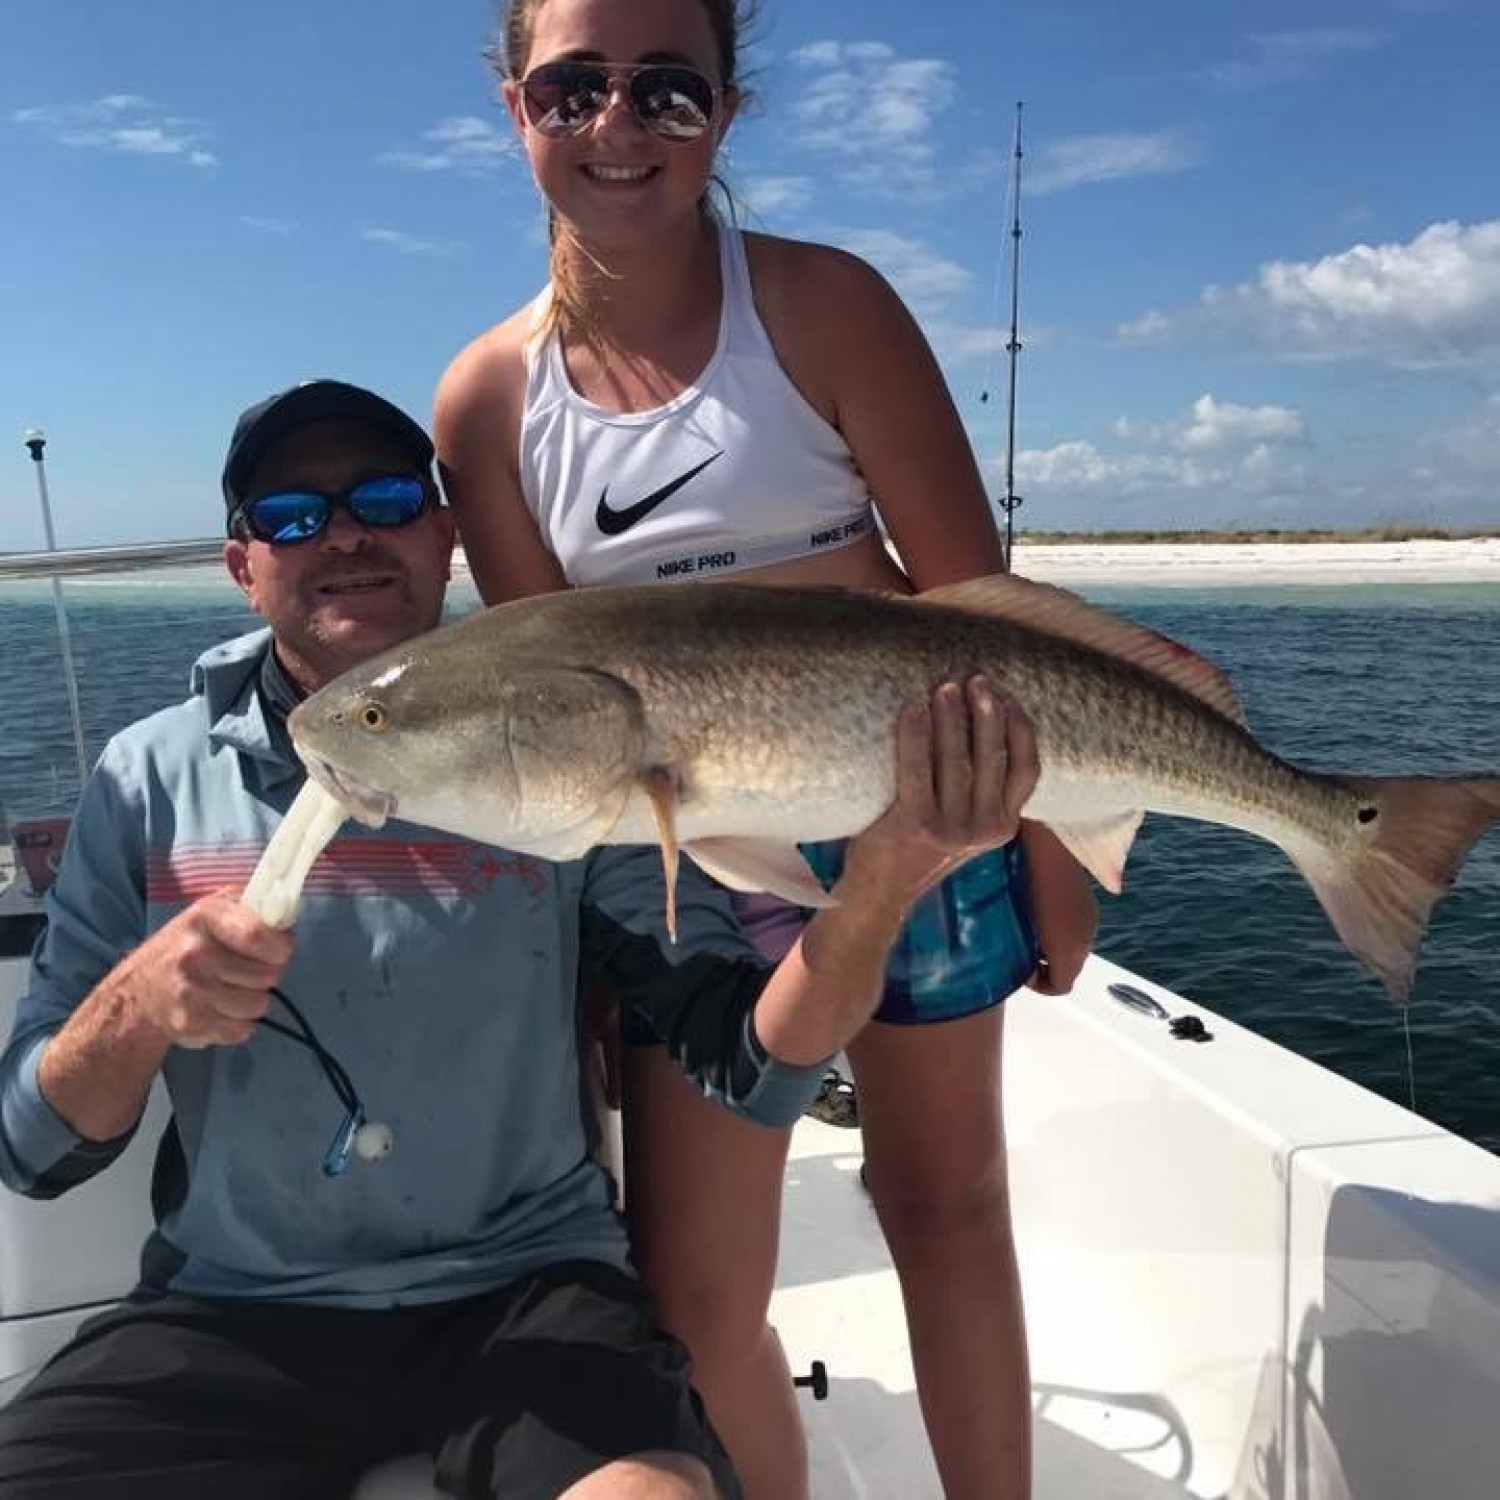 Katie with her first redfish showing her brothers how to catch bulls.